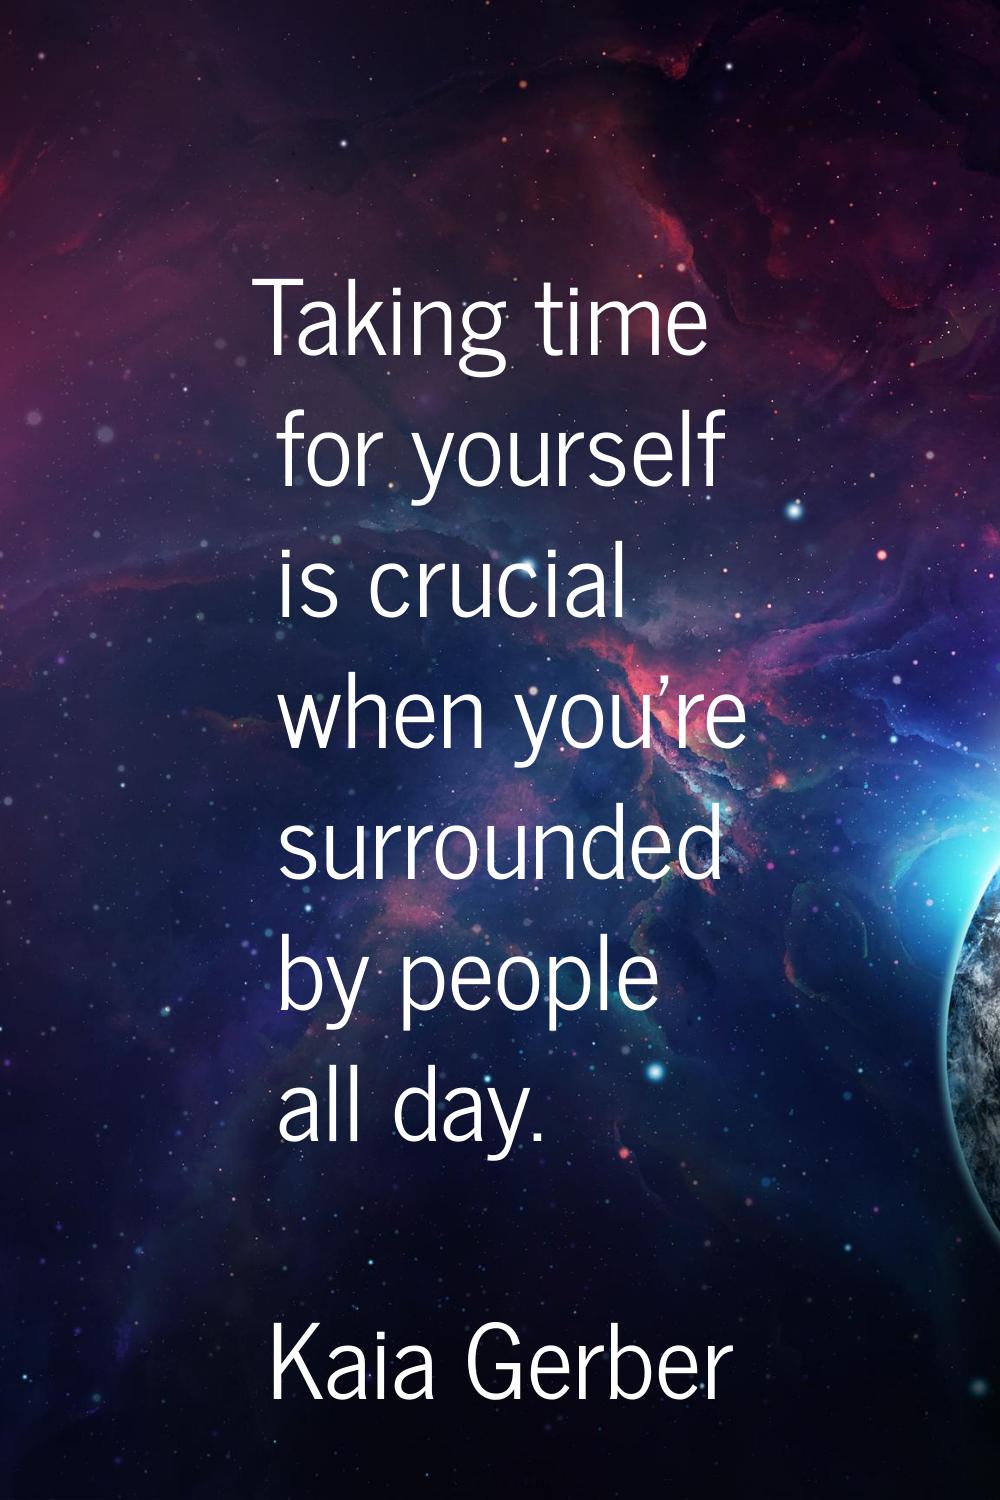 Taking time for yourself is crucial when you're surrounded by people all day.